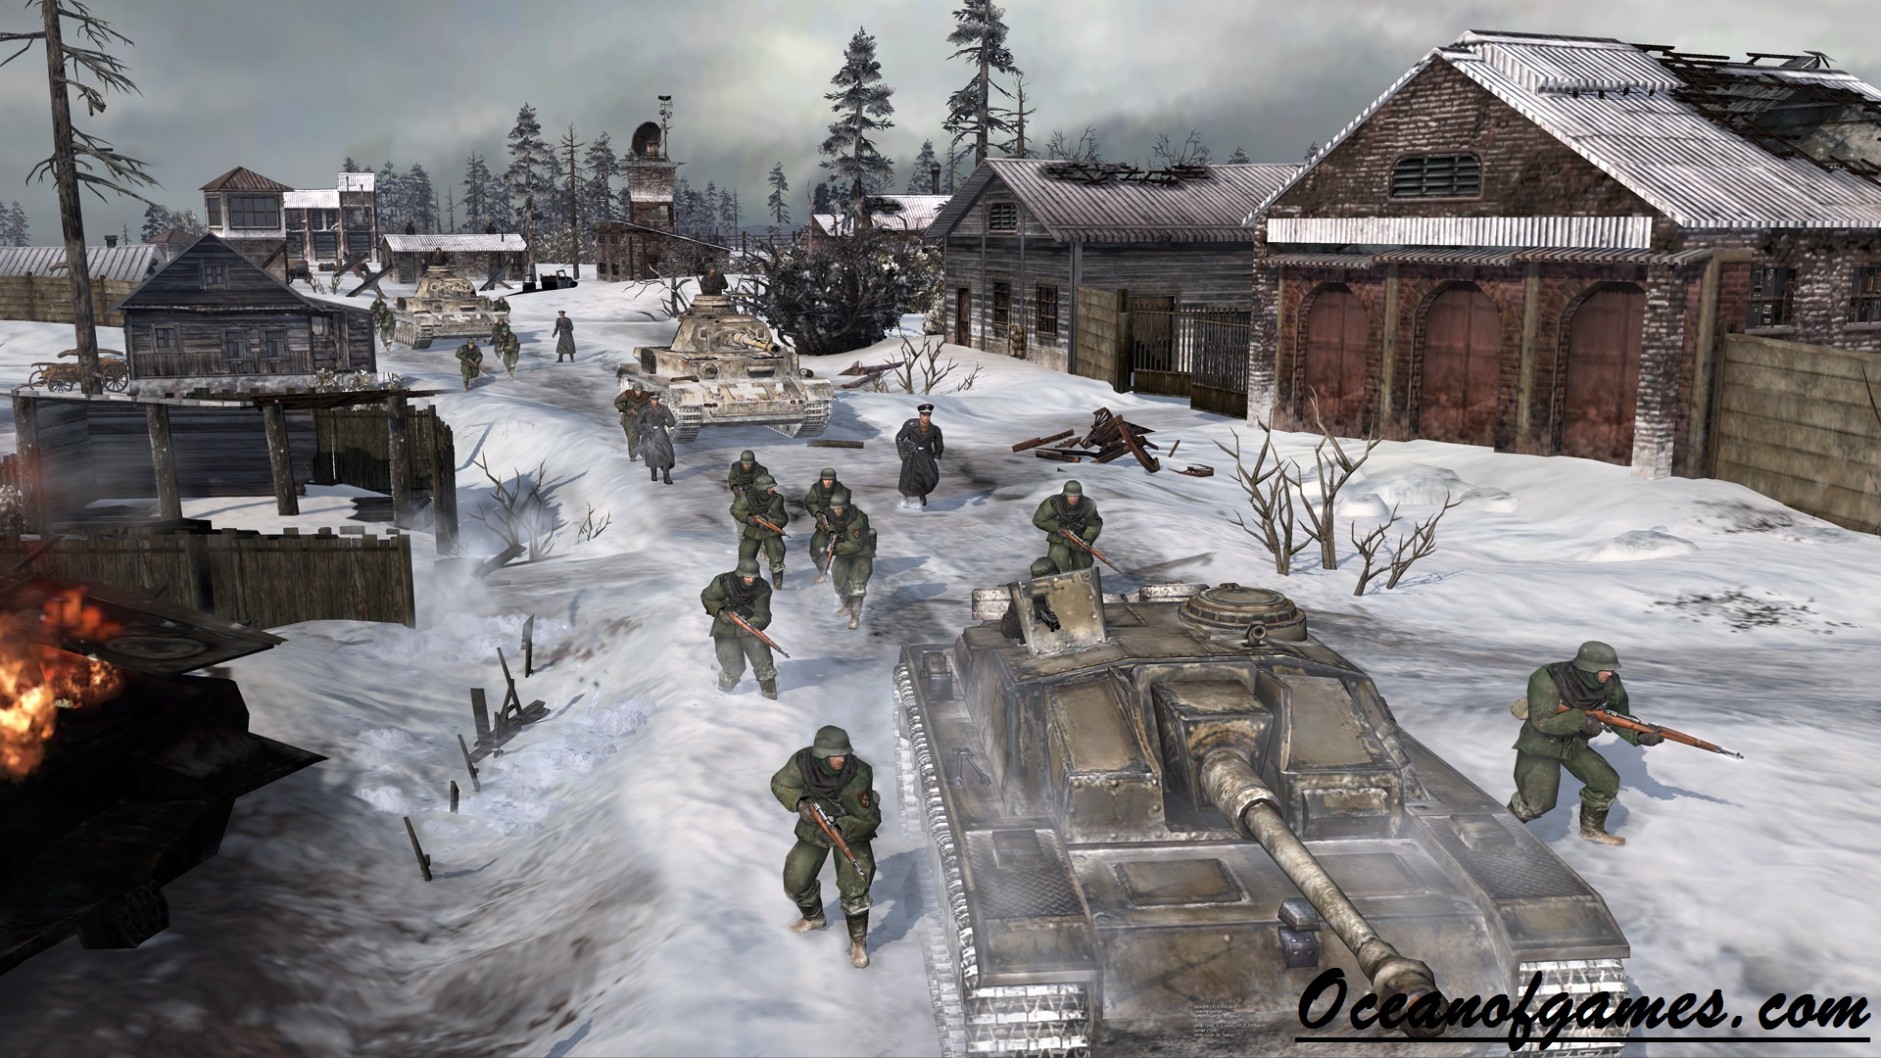 a company of heroes movie